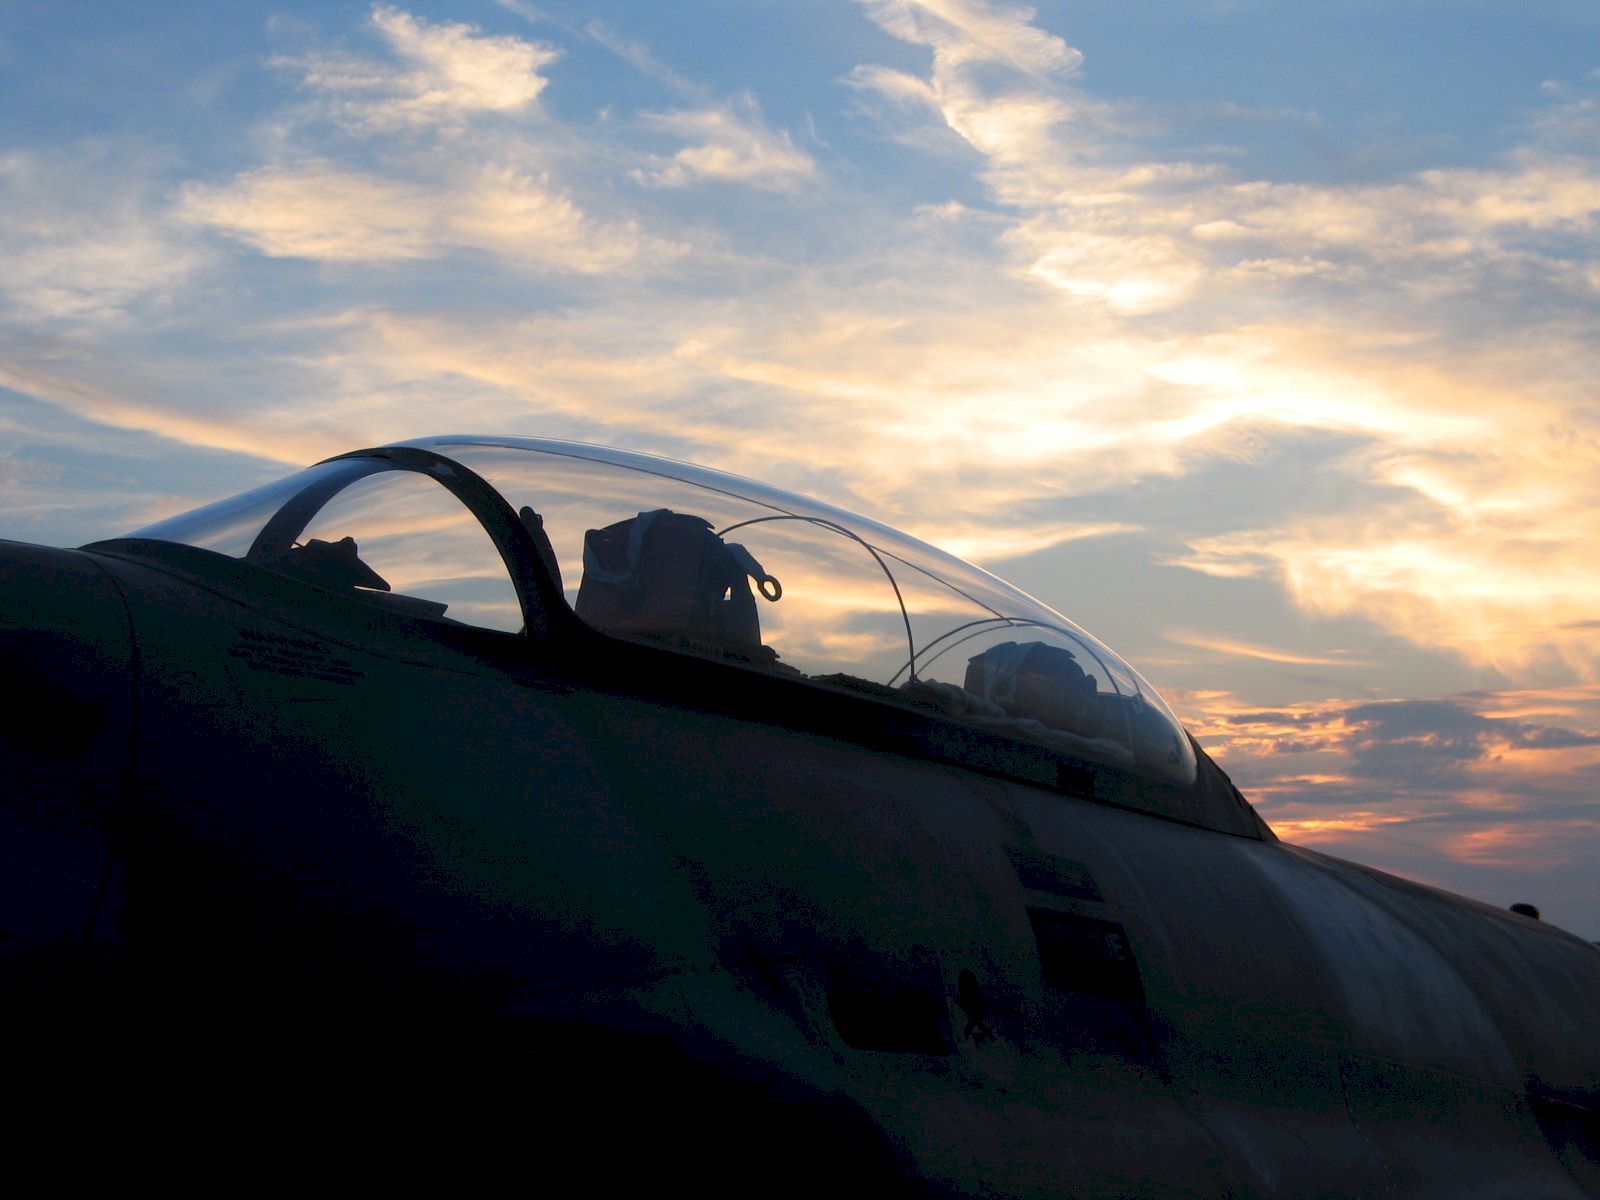 T33 and Sunset